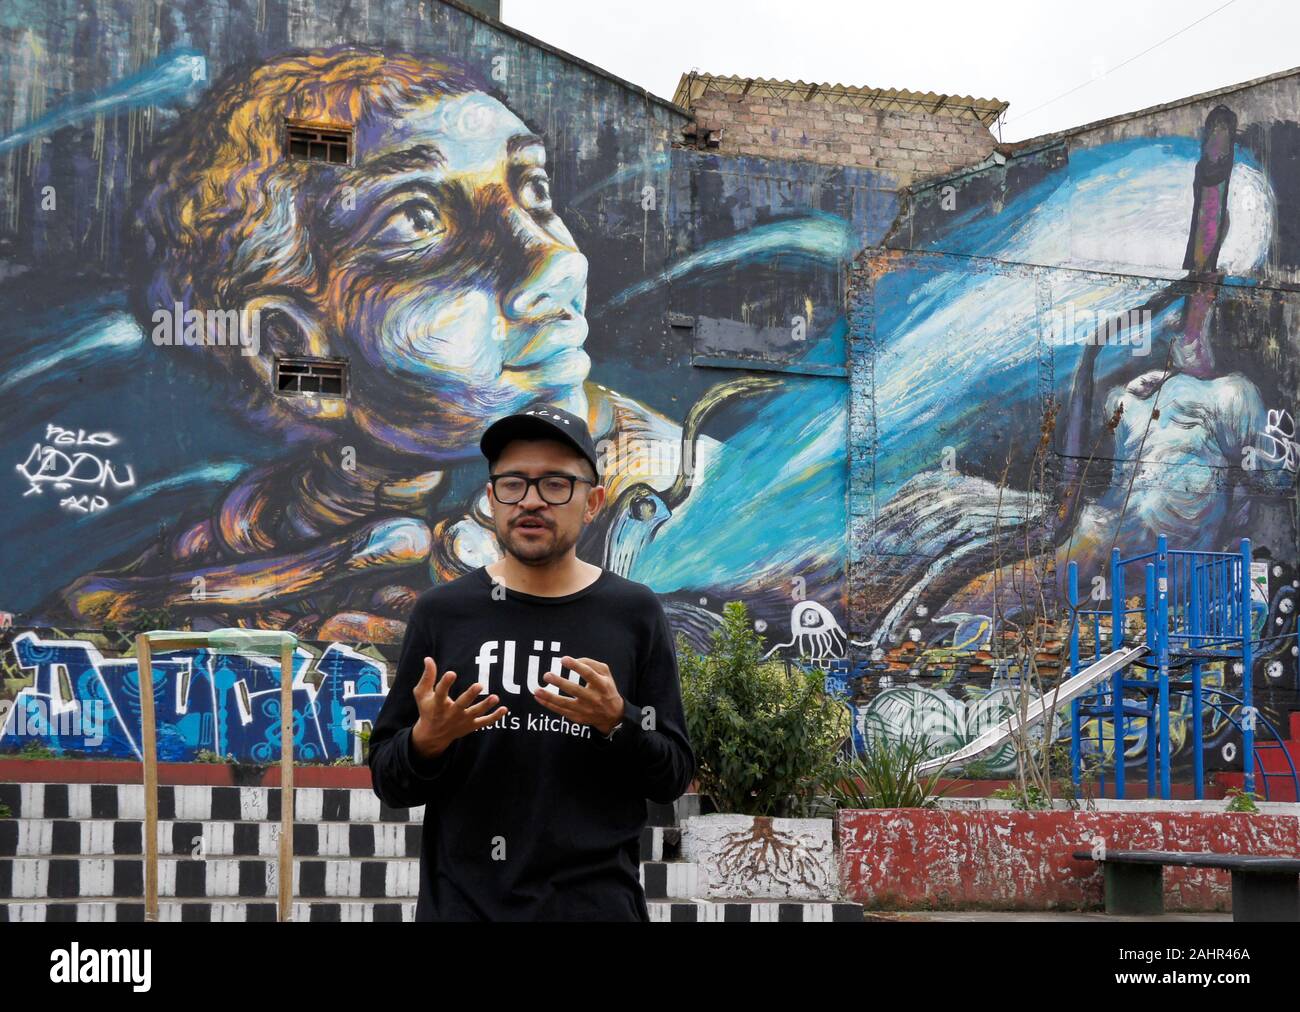 Artist Leading Walking Tour Of Street Art Murals This One By Bastardilla And Graffiti In La Candelaria District Of Bogota Colombia Stock Photo Alamy